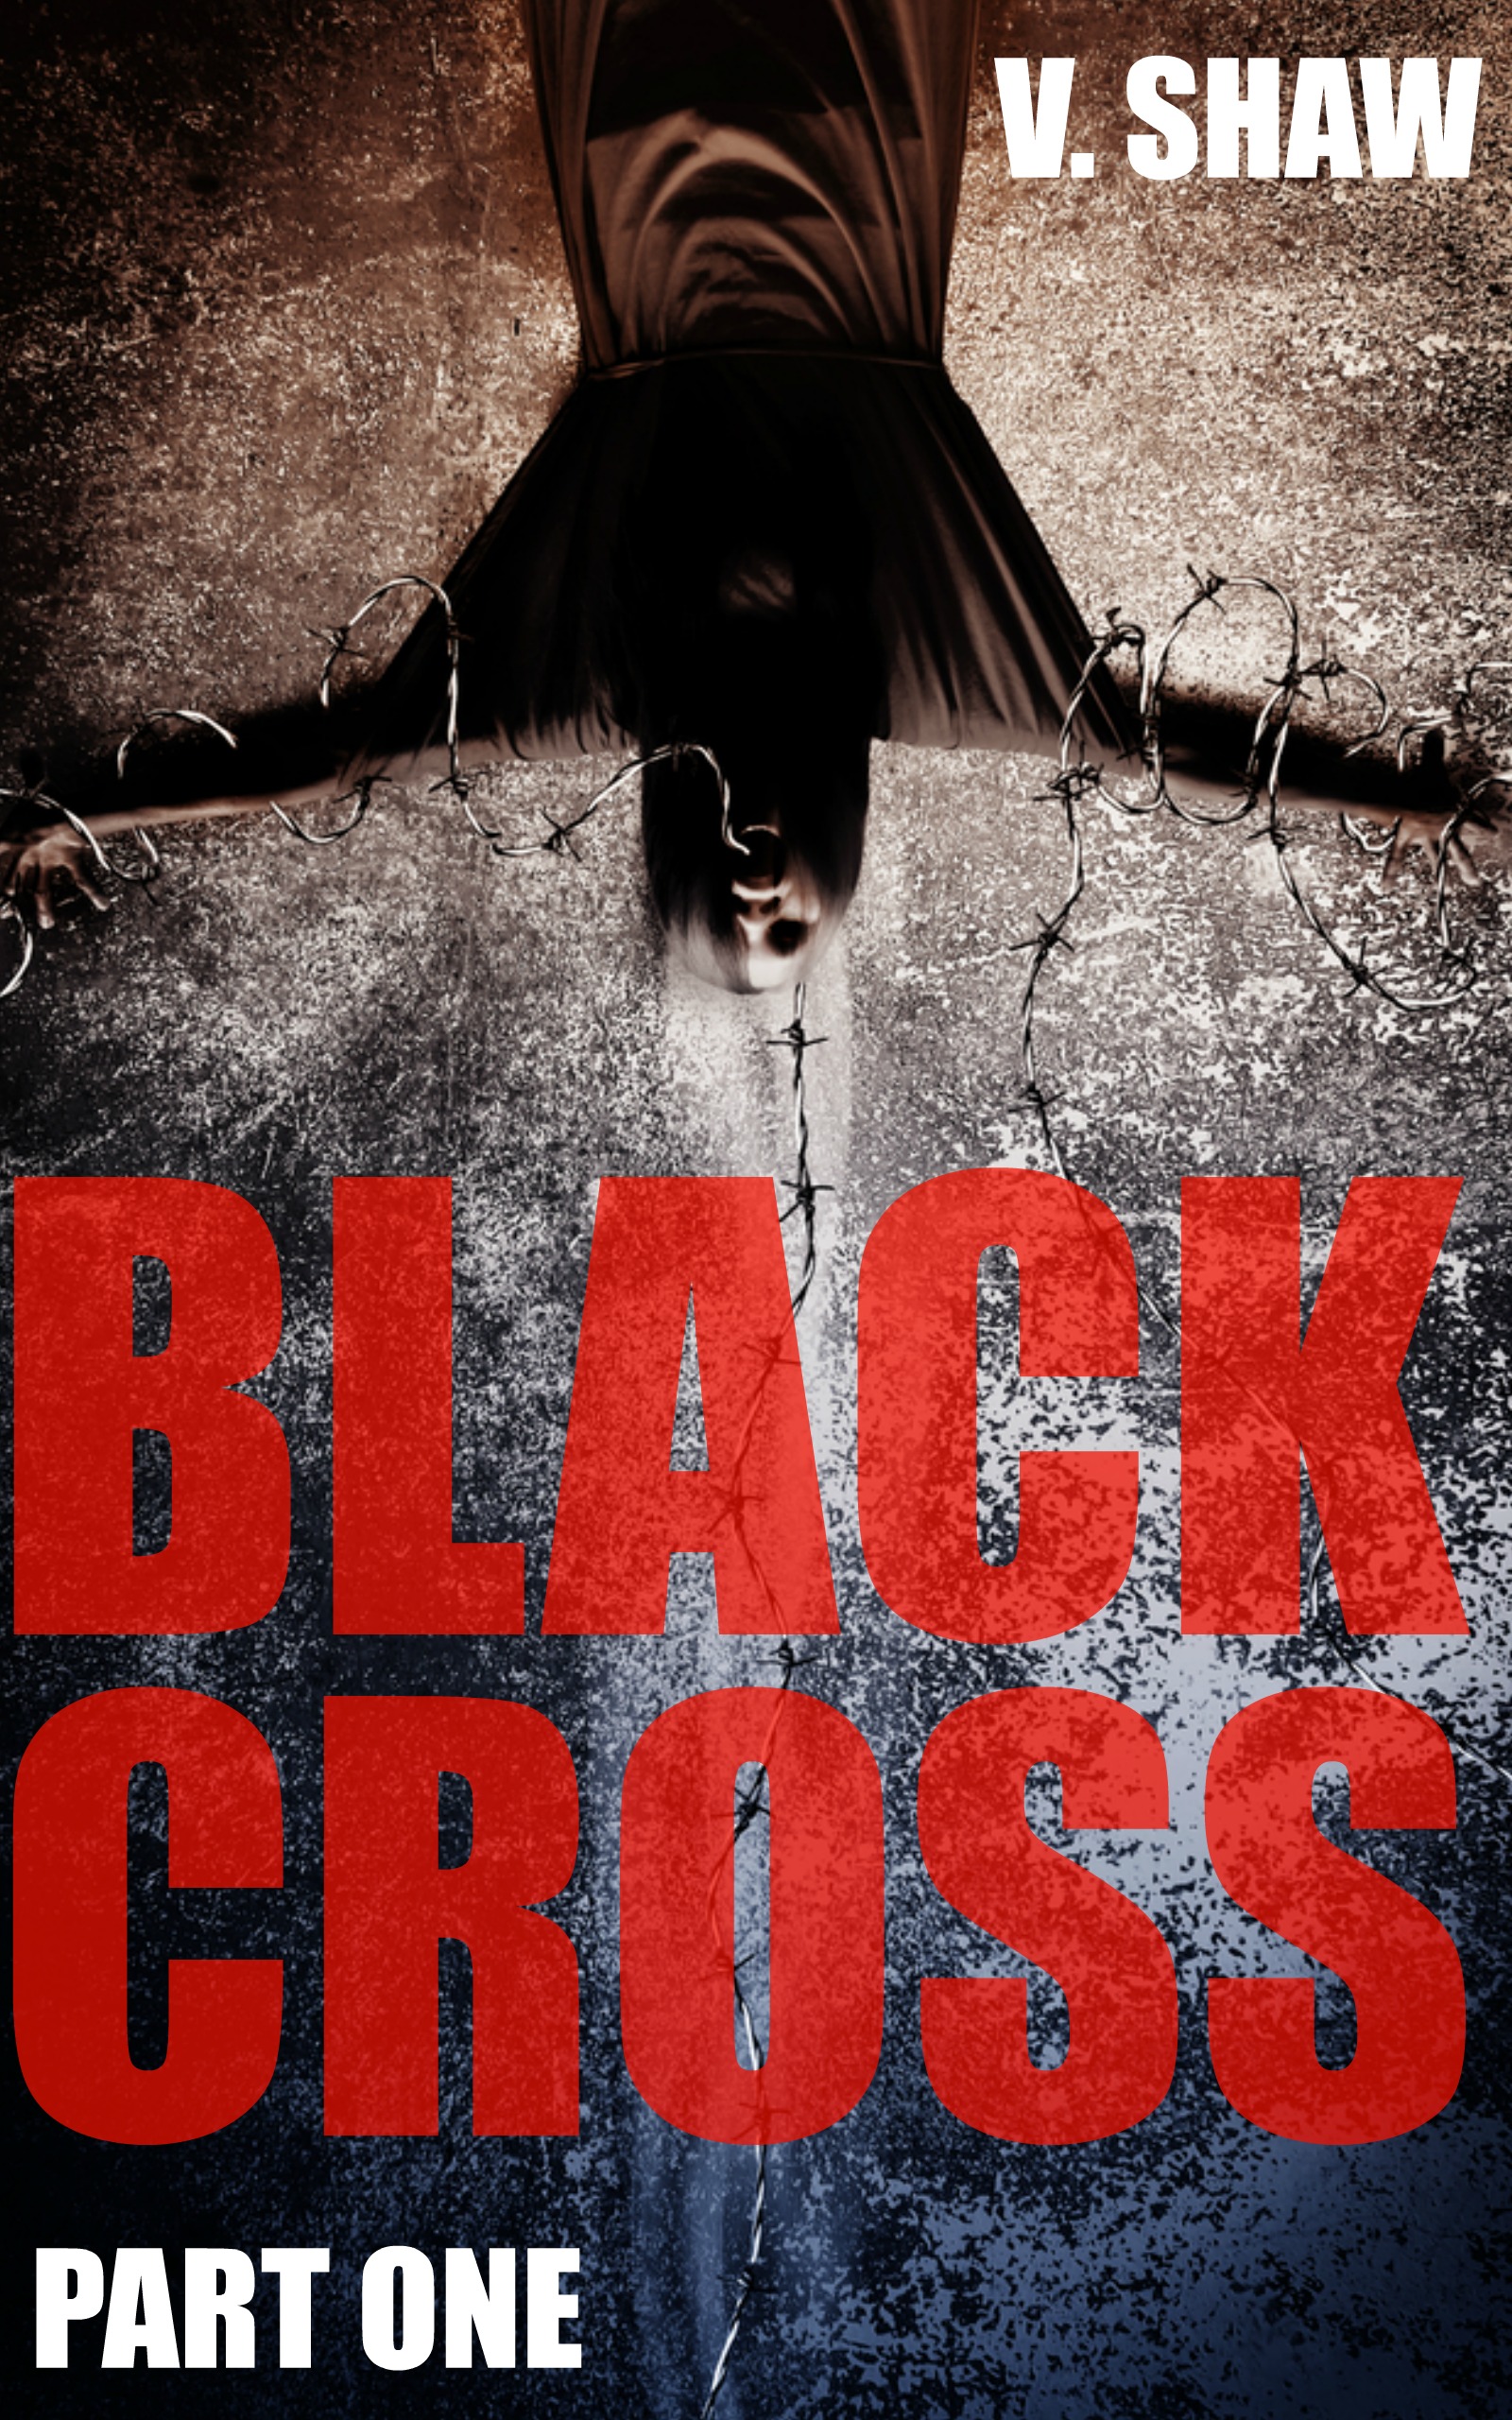 FREE: Black cross: Part One by V. Shaw